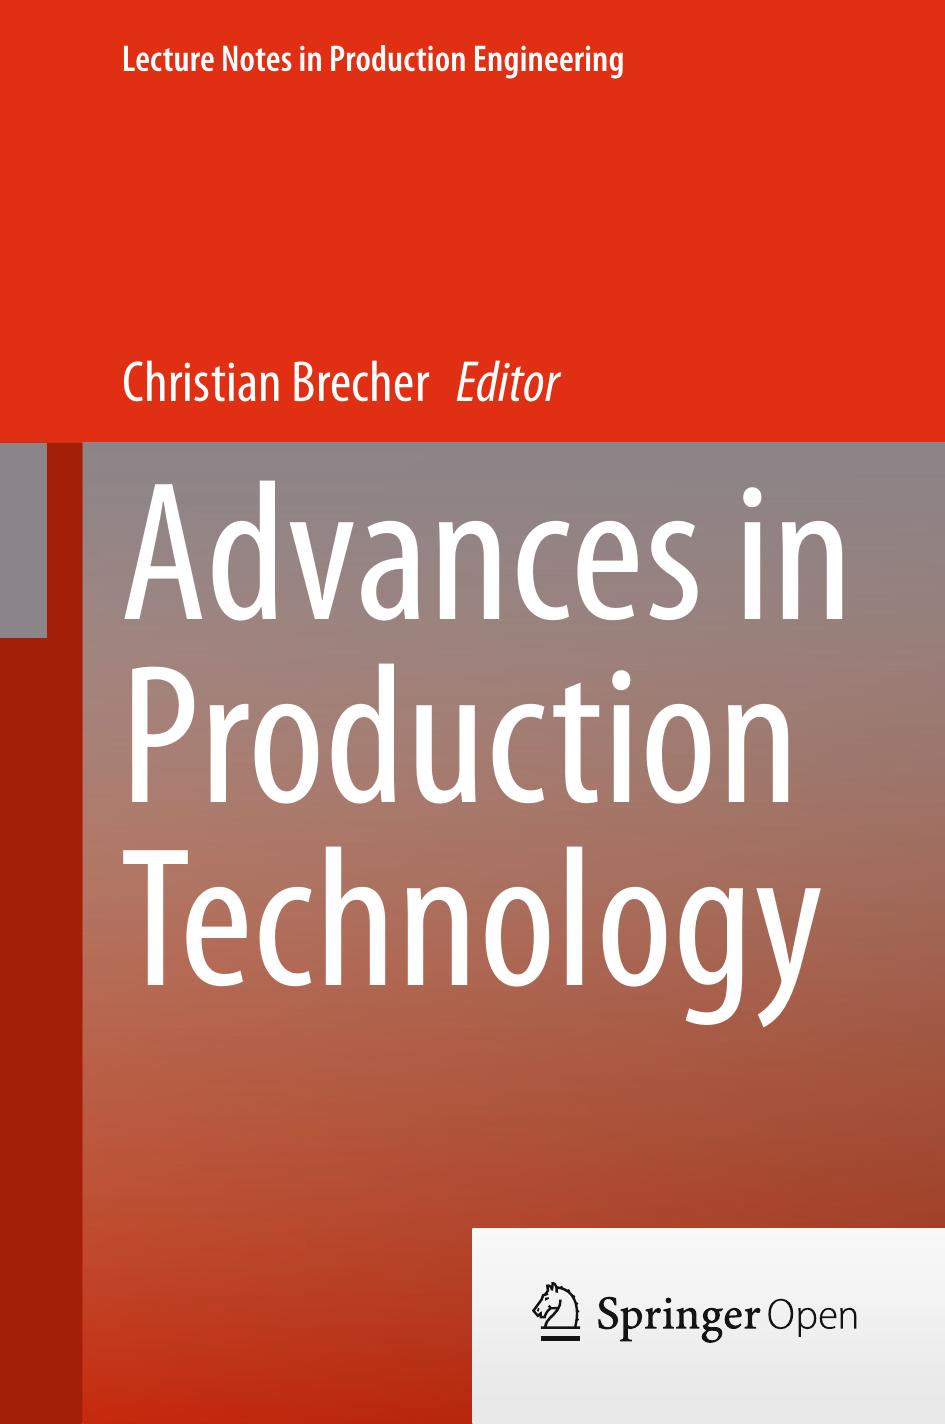 Advances in Production Technology by Christian Brecher